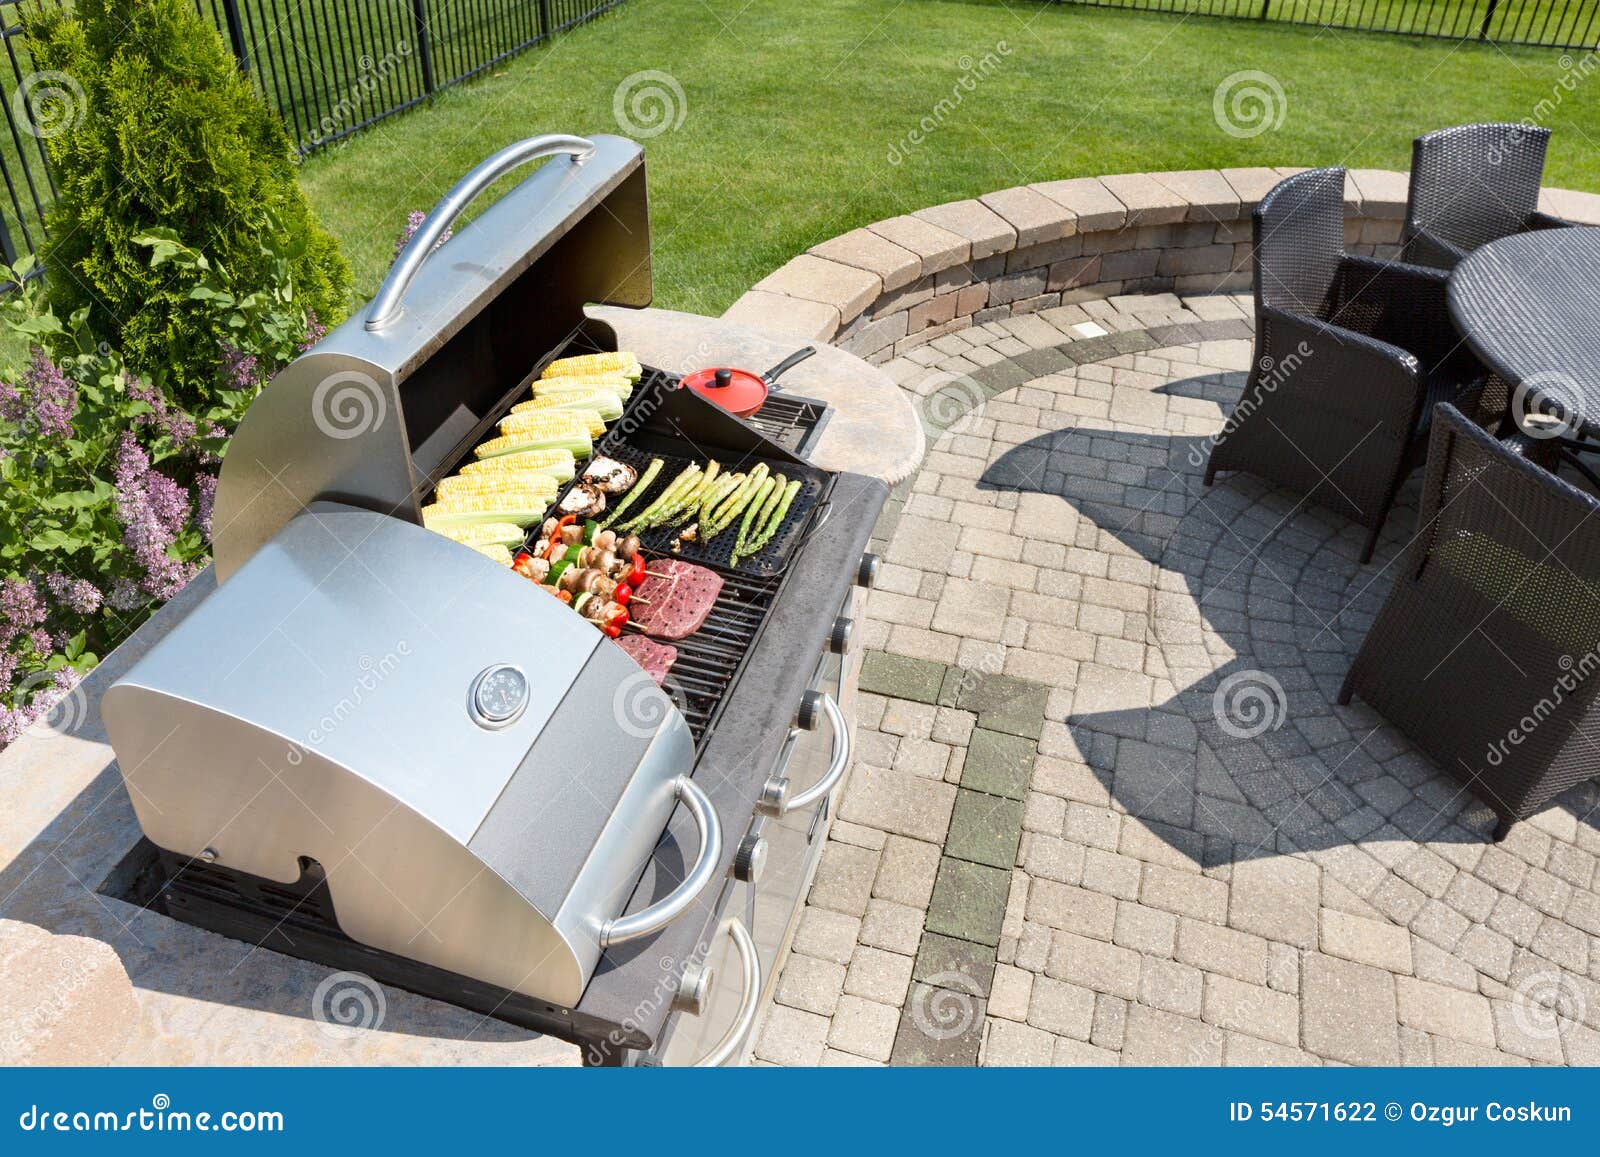 grilling food on an outdoor gas barbecue